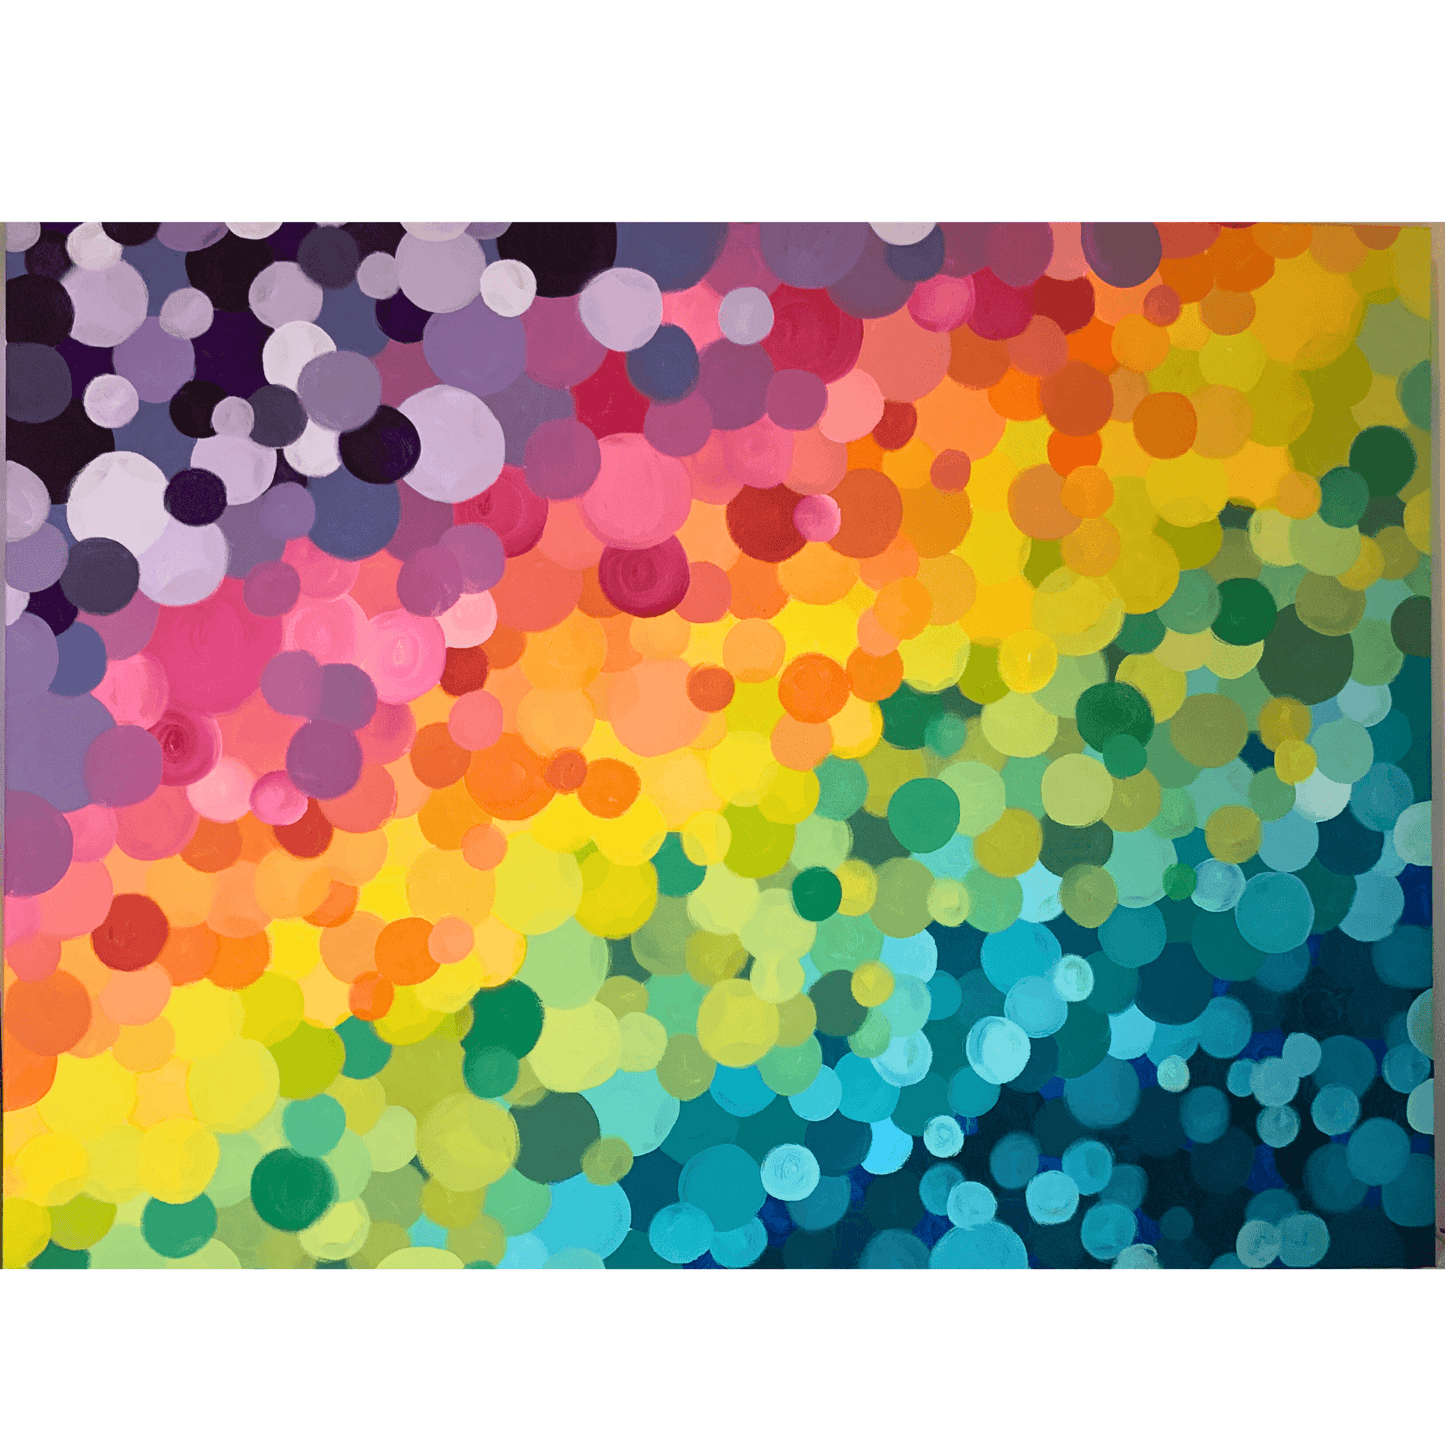 SMILES- Modern Acrylic Art Painting 30x40 inch Canvas with ALL the colors!